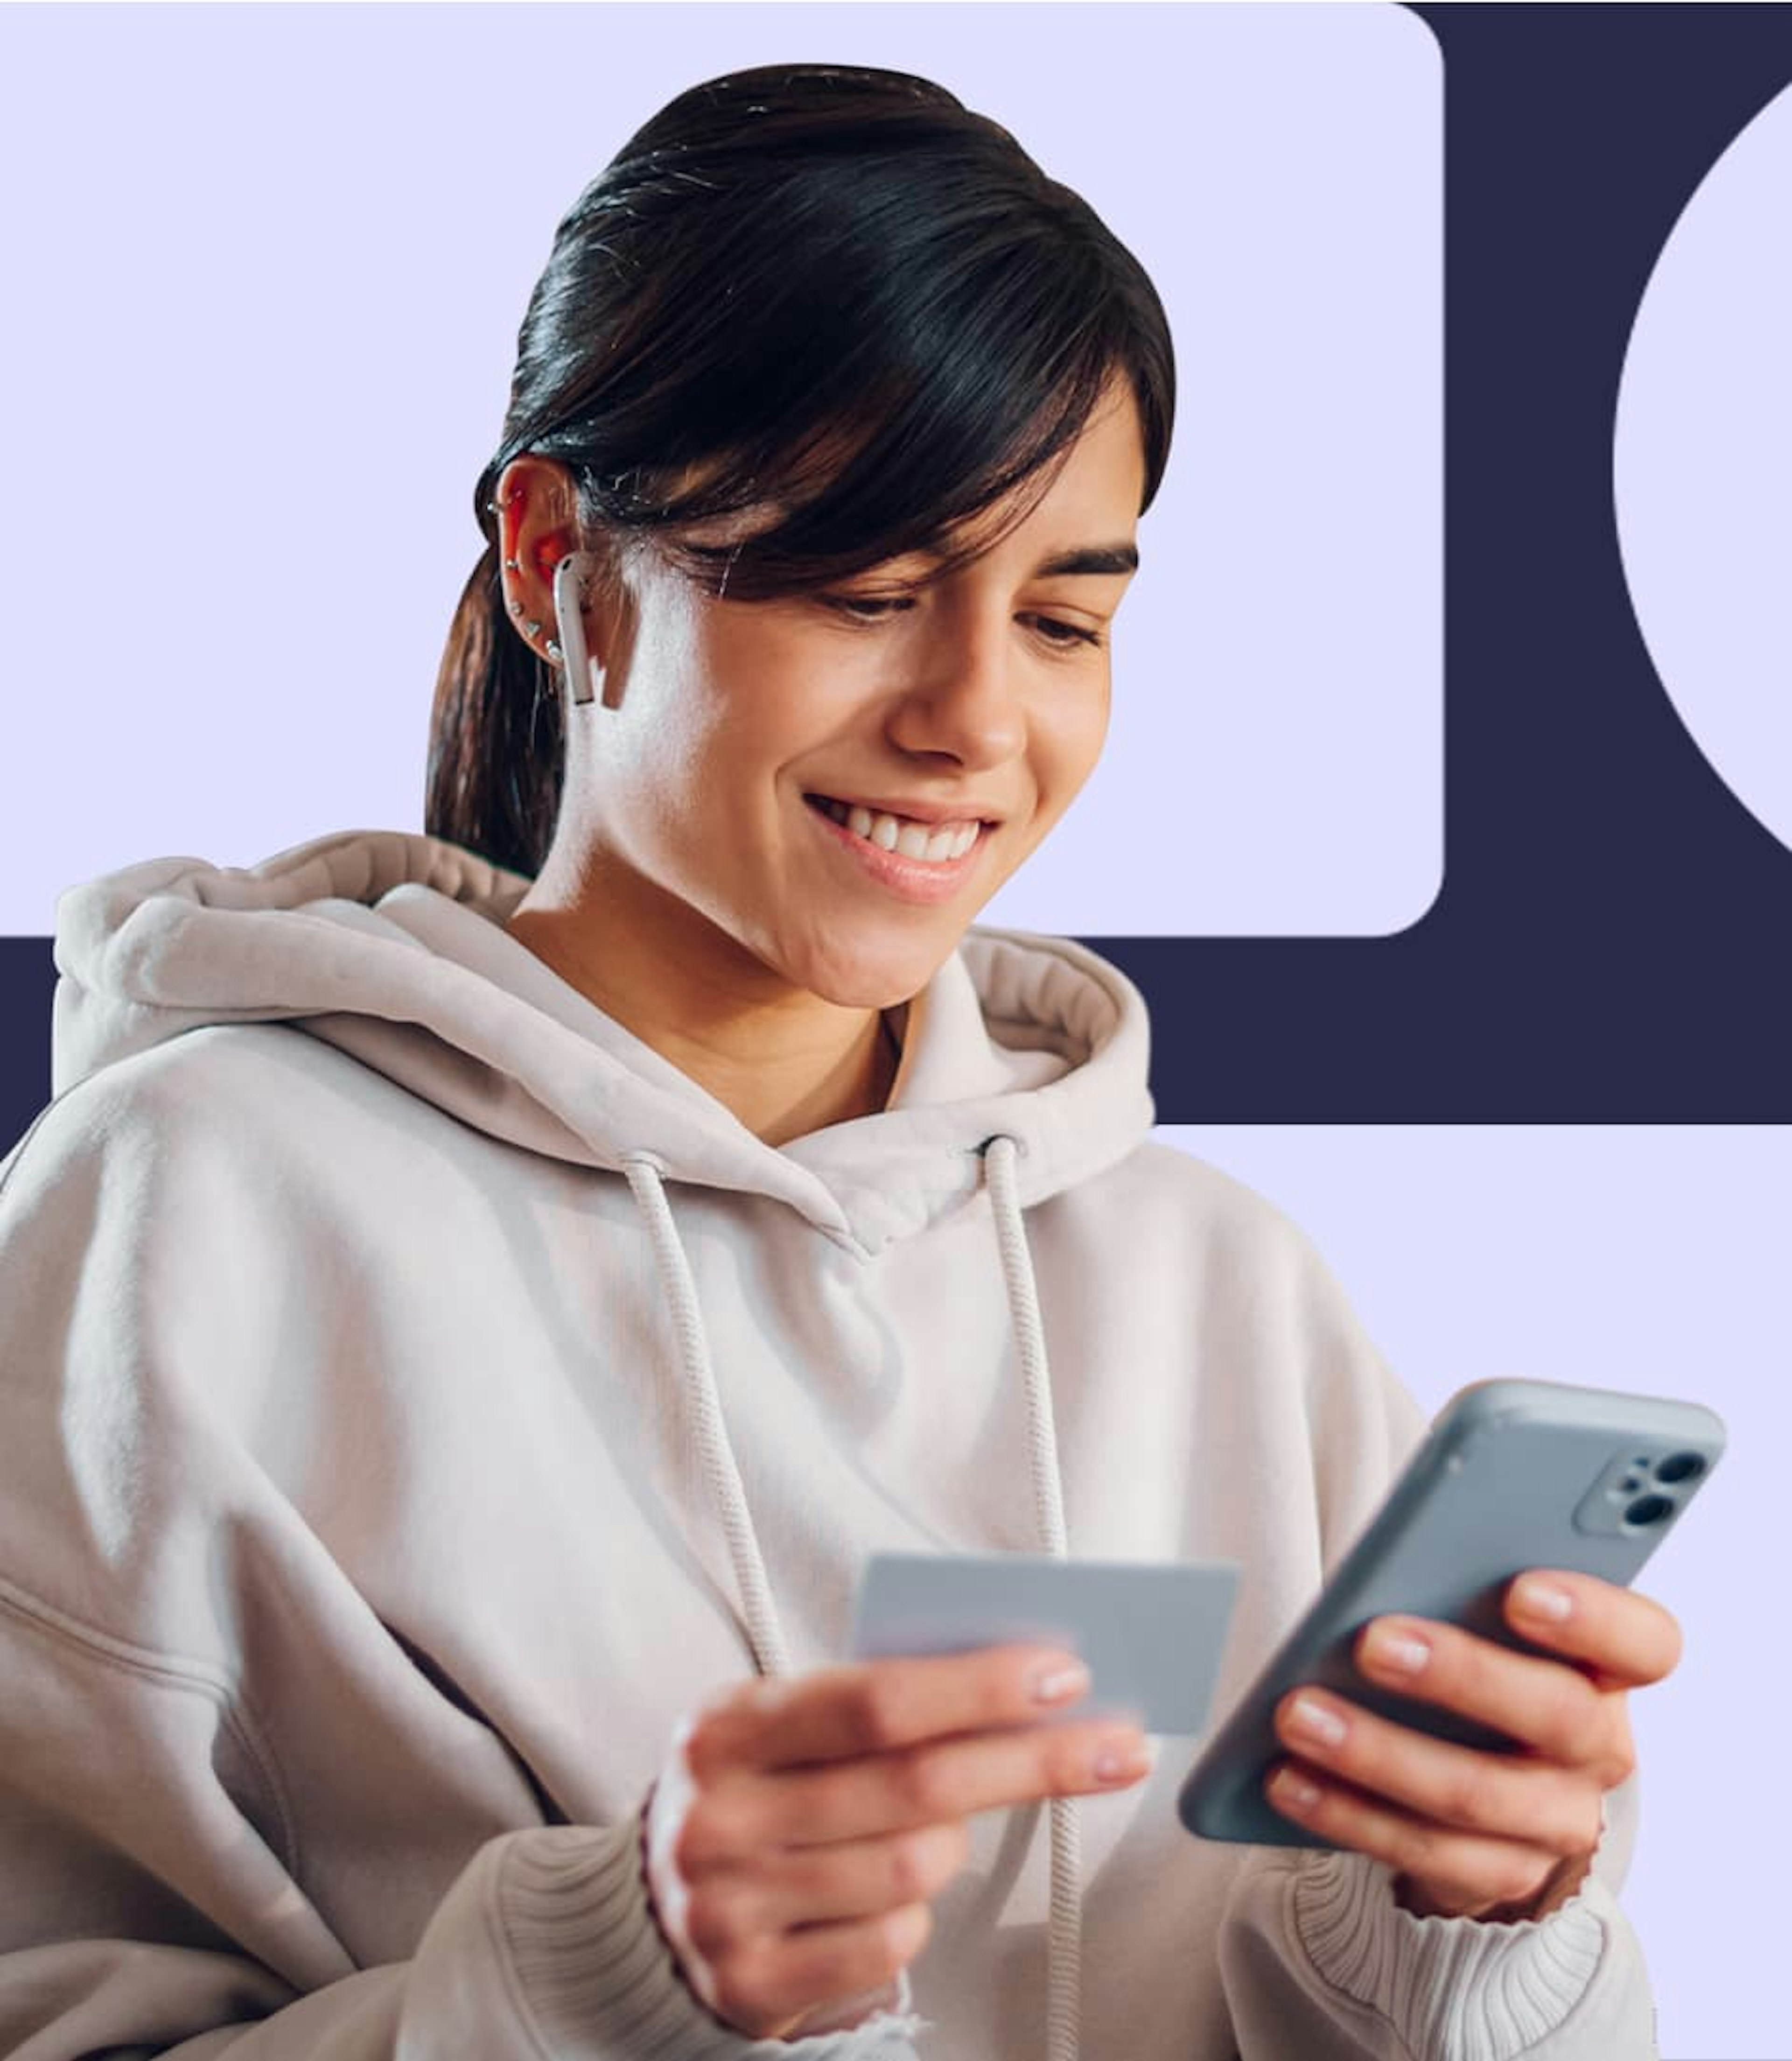 A woman wearing a beige sweatshirt, holding a payment card in one hand and a cellphone in the other.